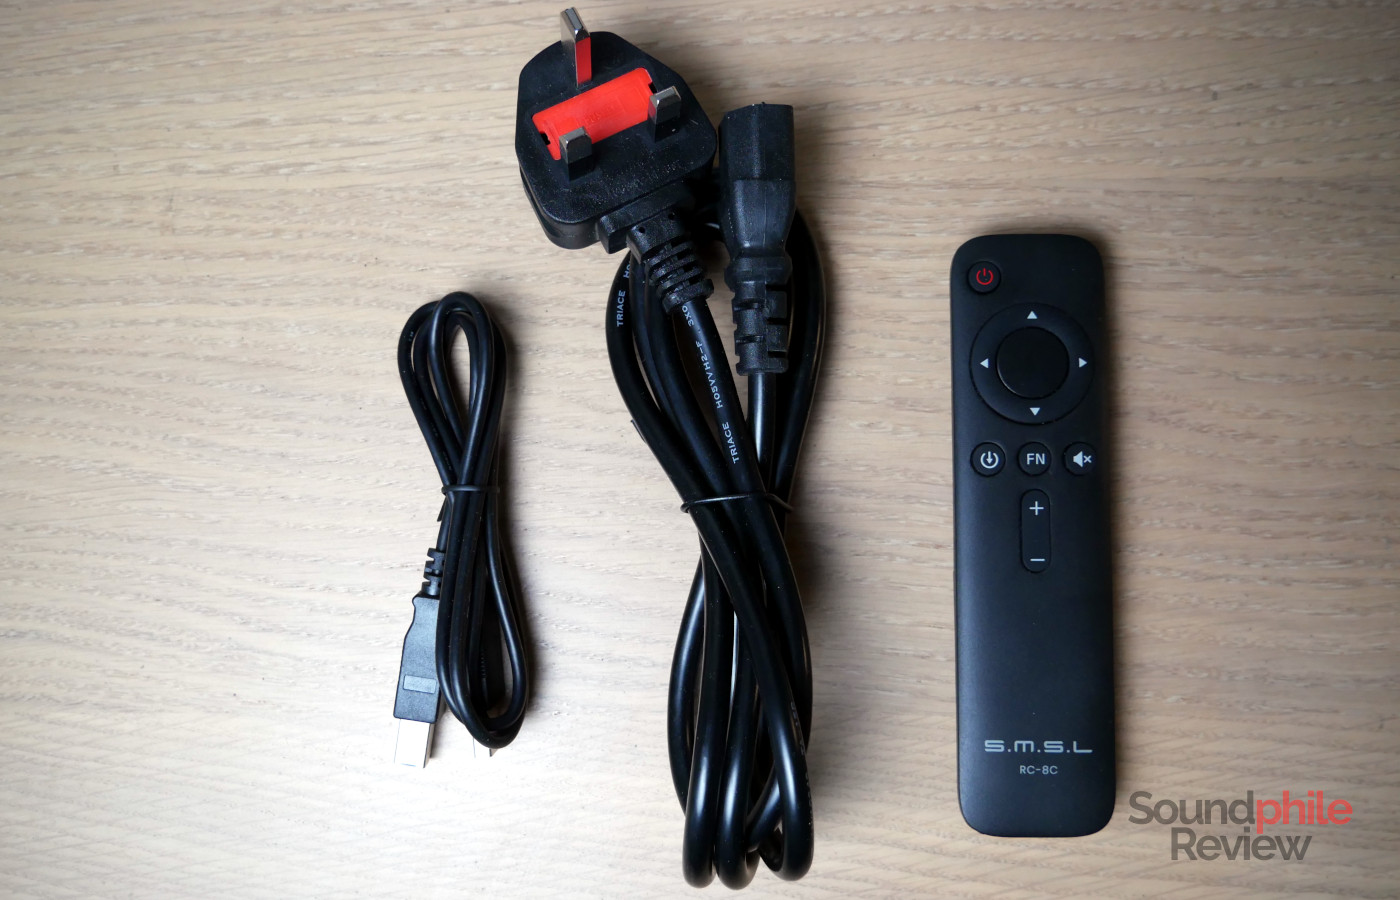 SMSL DO300 accessories include a power cable, a USB cable and a remote